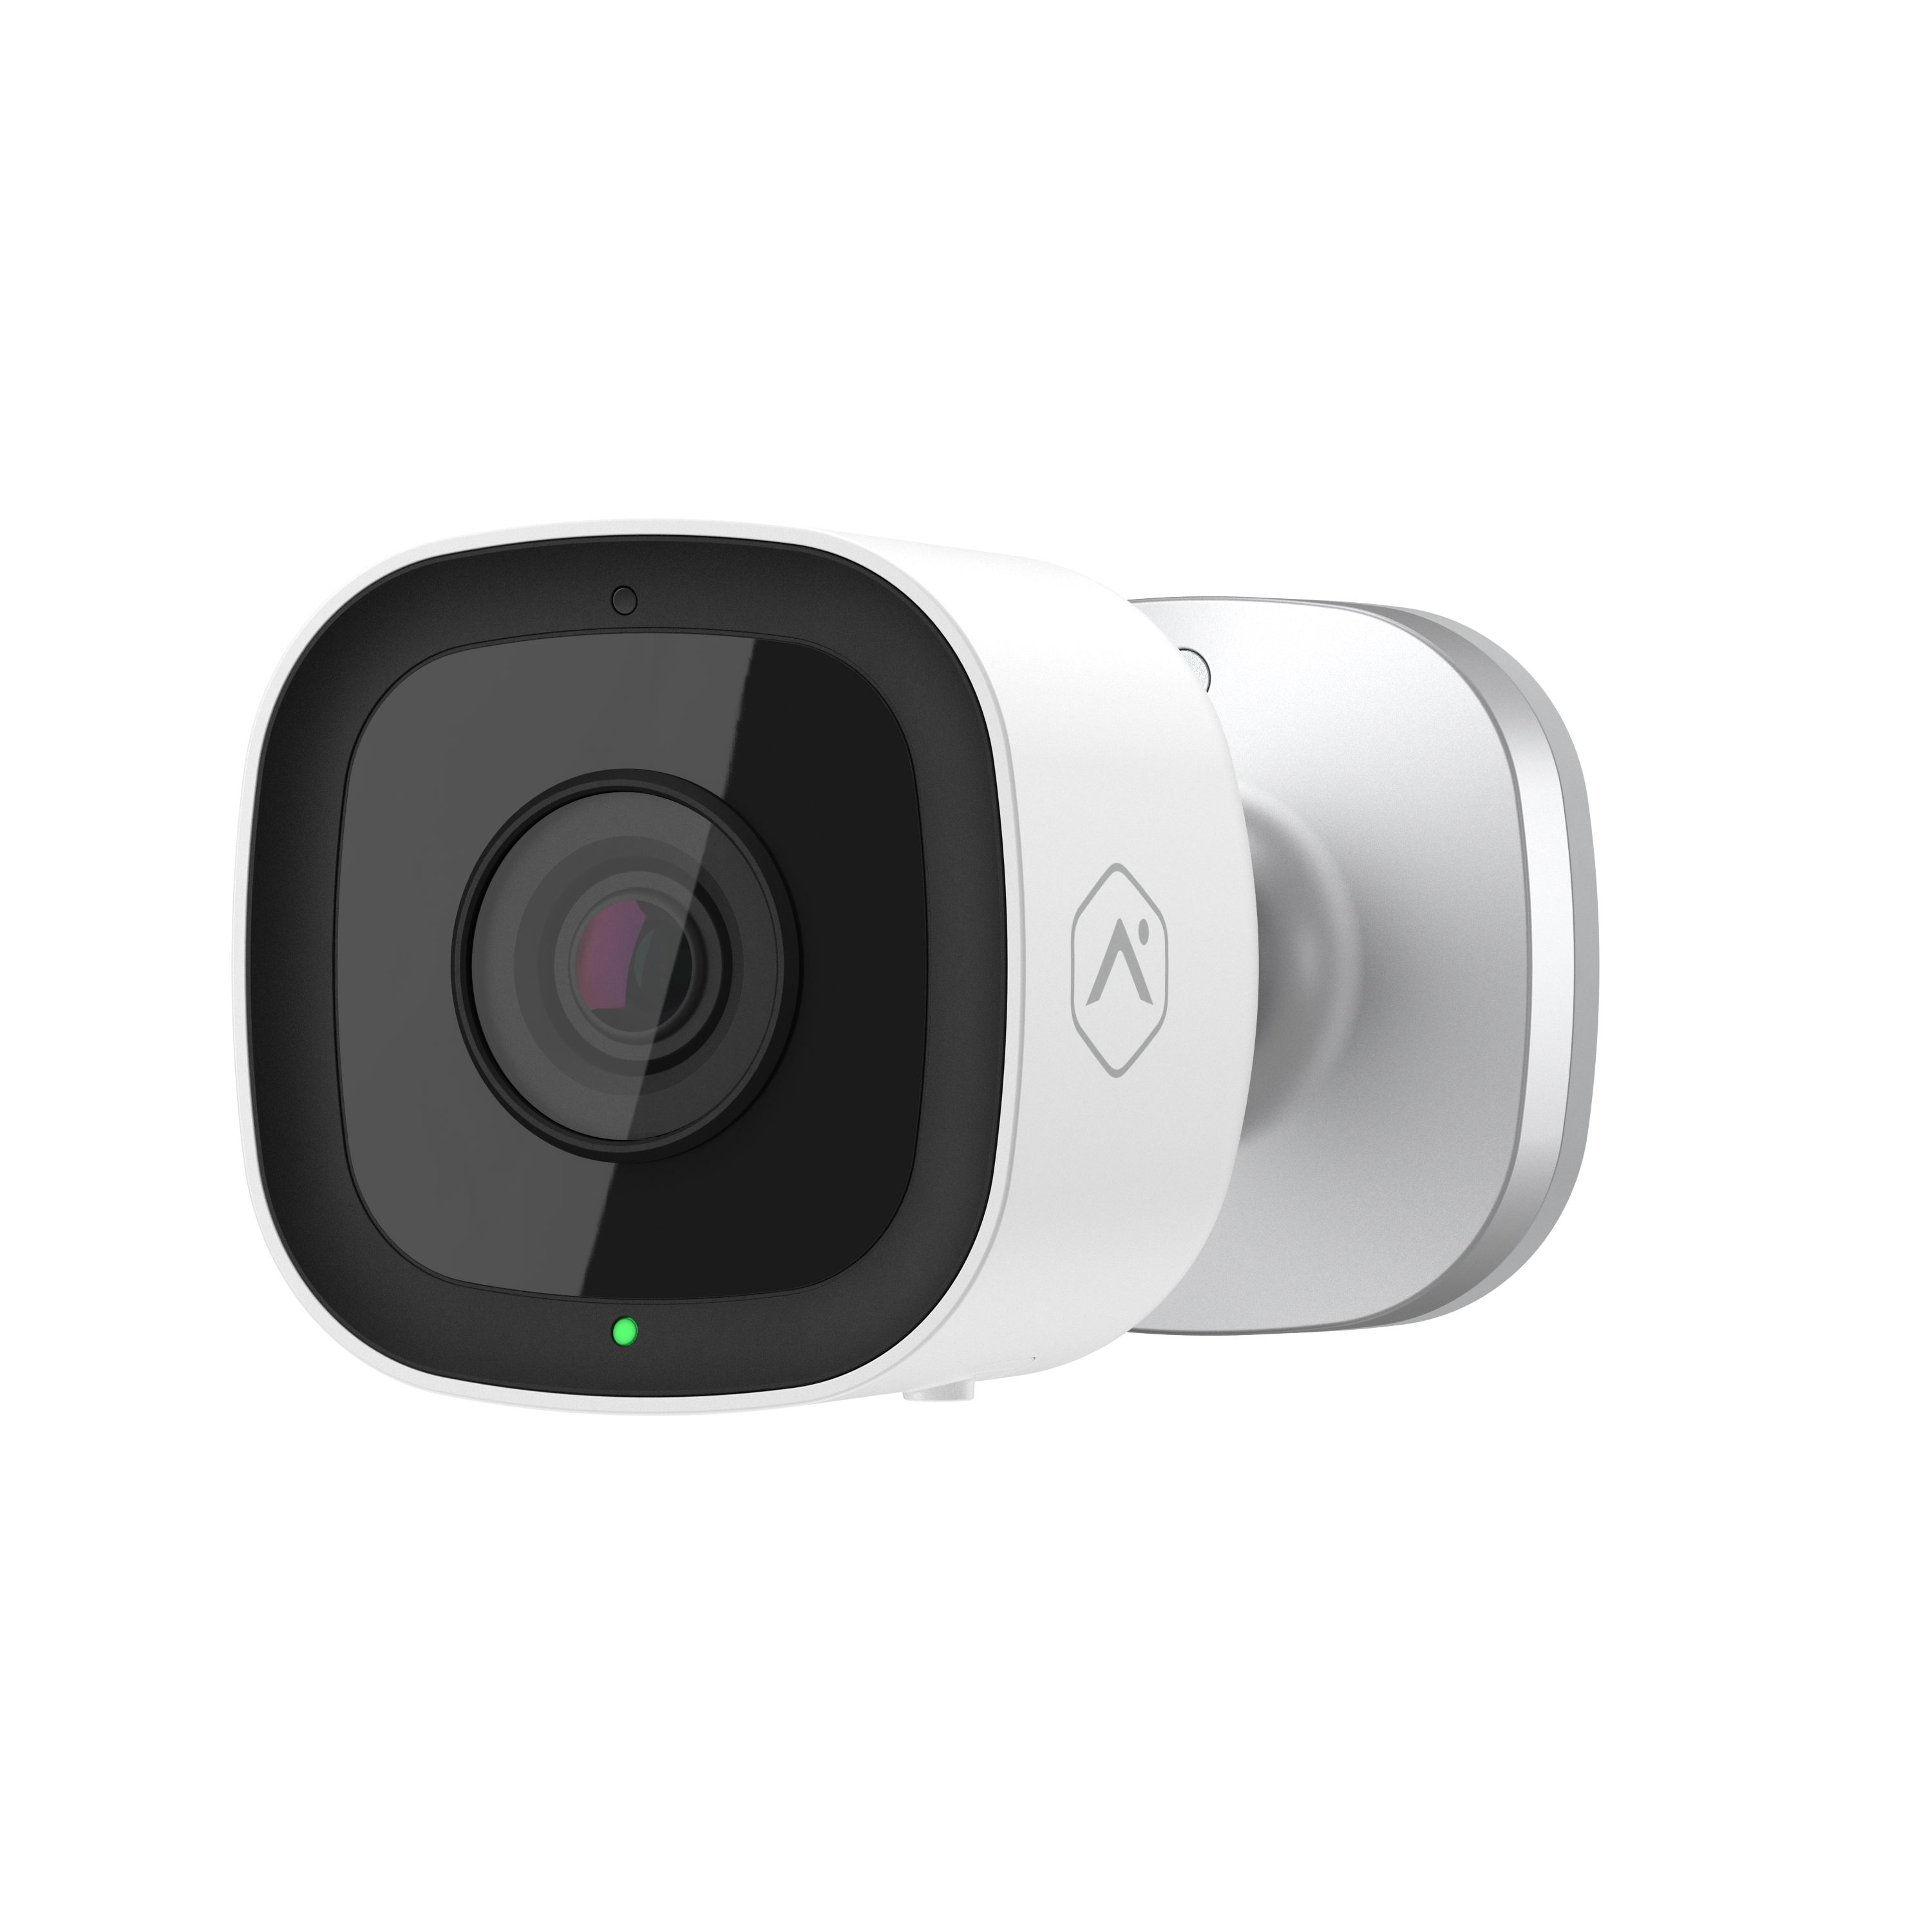 1080p Outdoor WI-FI Video Camera with HDR